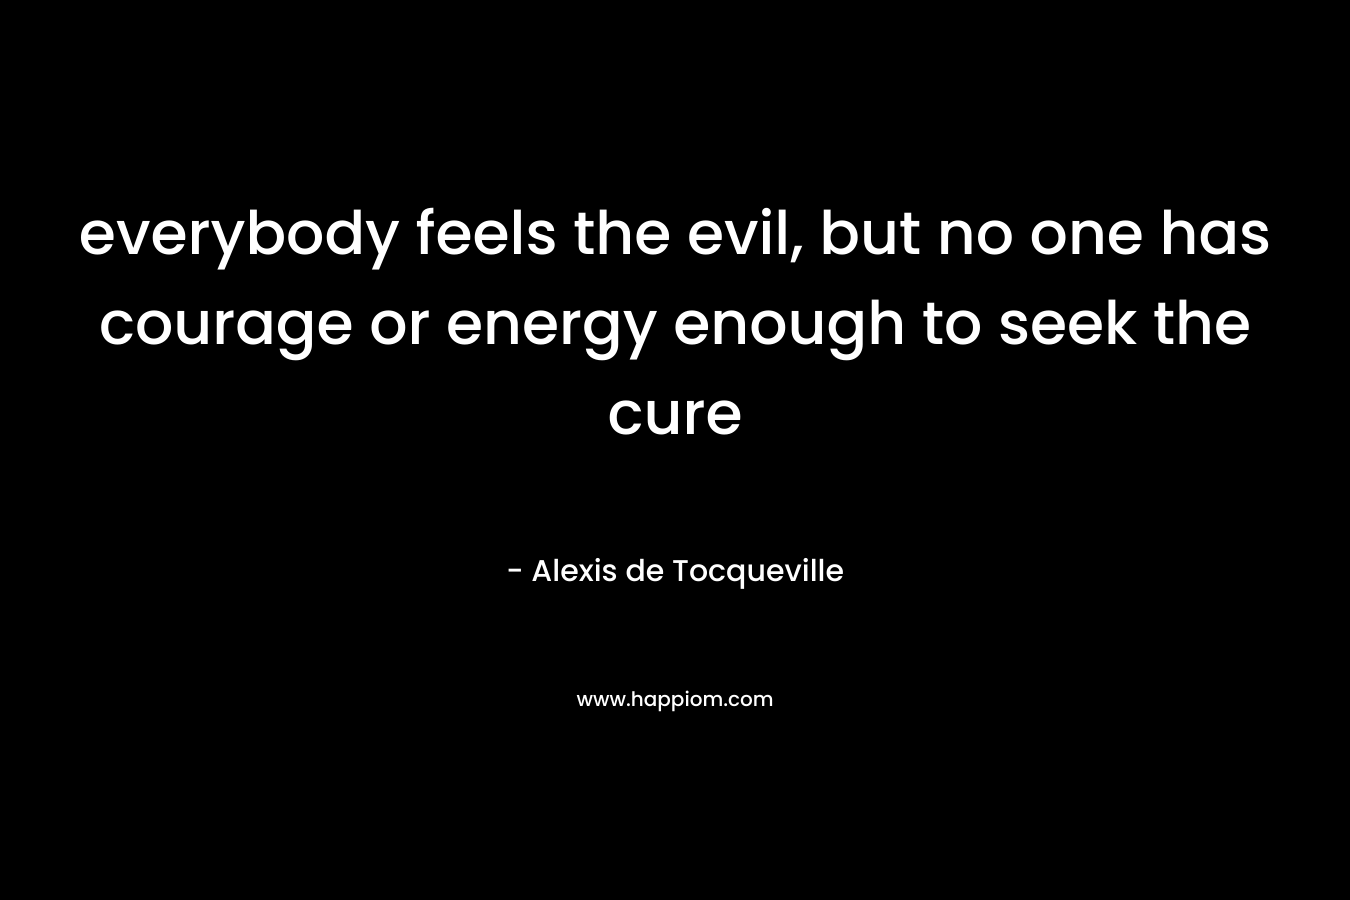 everybody feels the evil, but no one has courage or energy enough to seek the cure